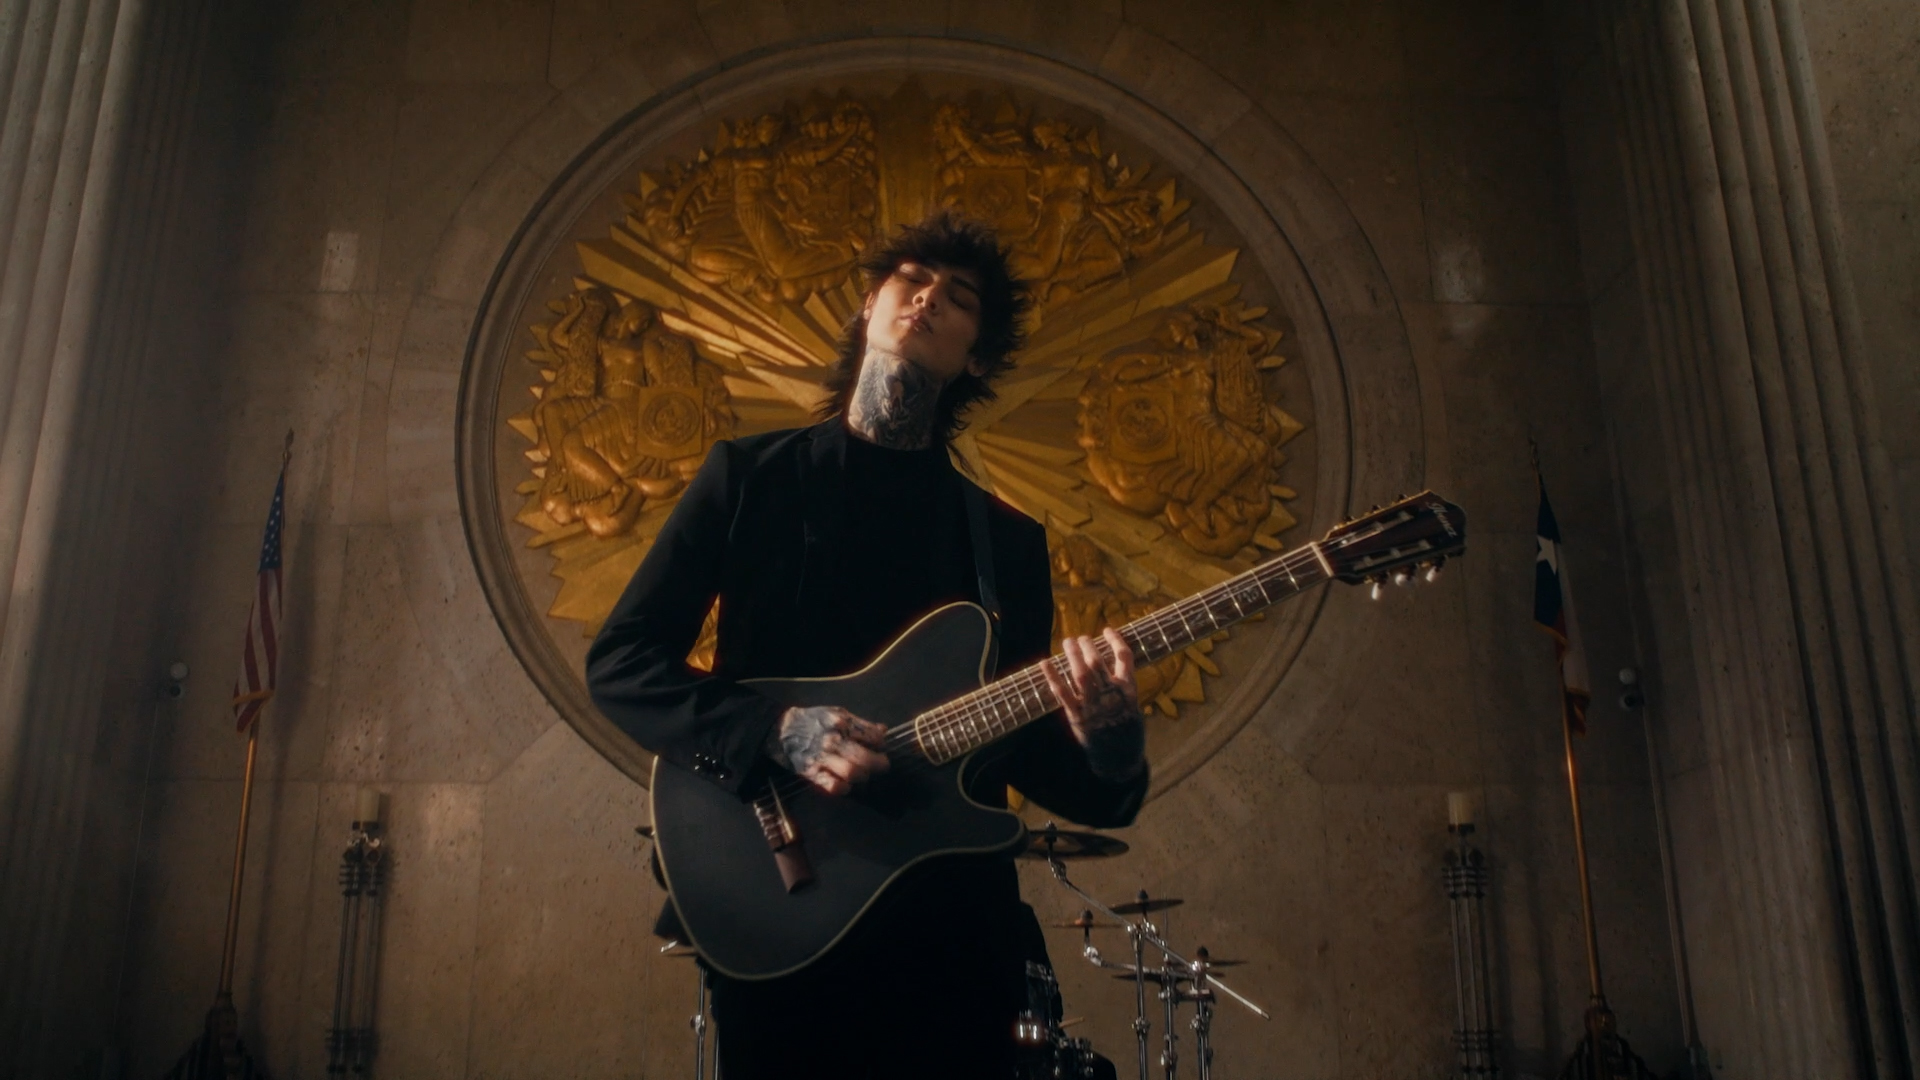 Tim Henson plays on signature Ibanez guitar in music video for Polyphia